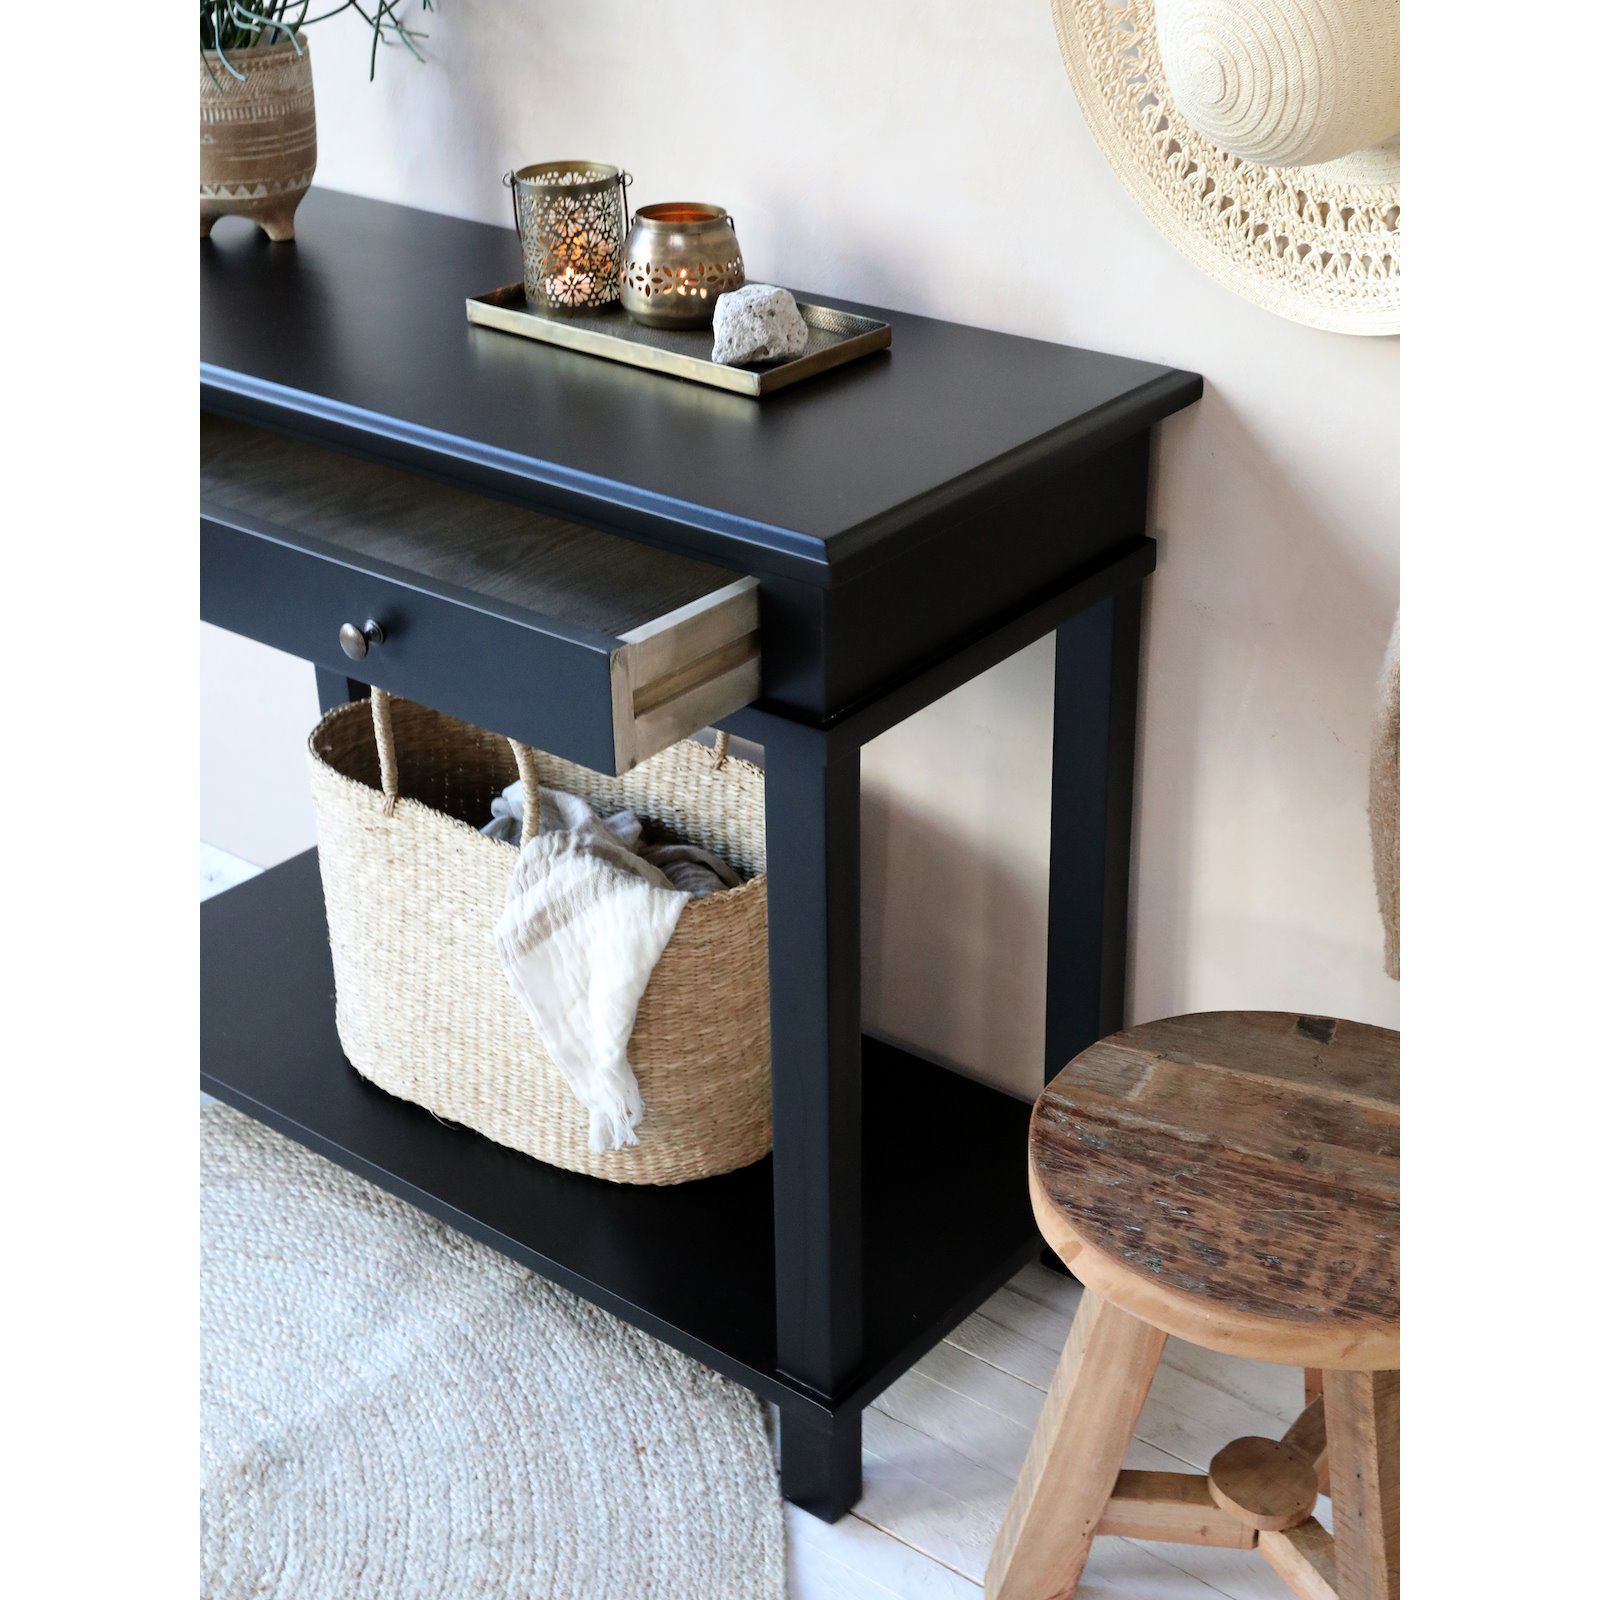 Small Classic Black Console Table With Regard To Black Console Tables (View 5 of 20)